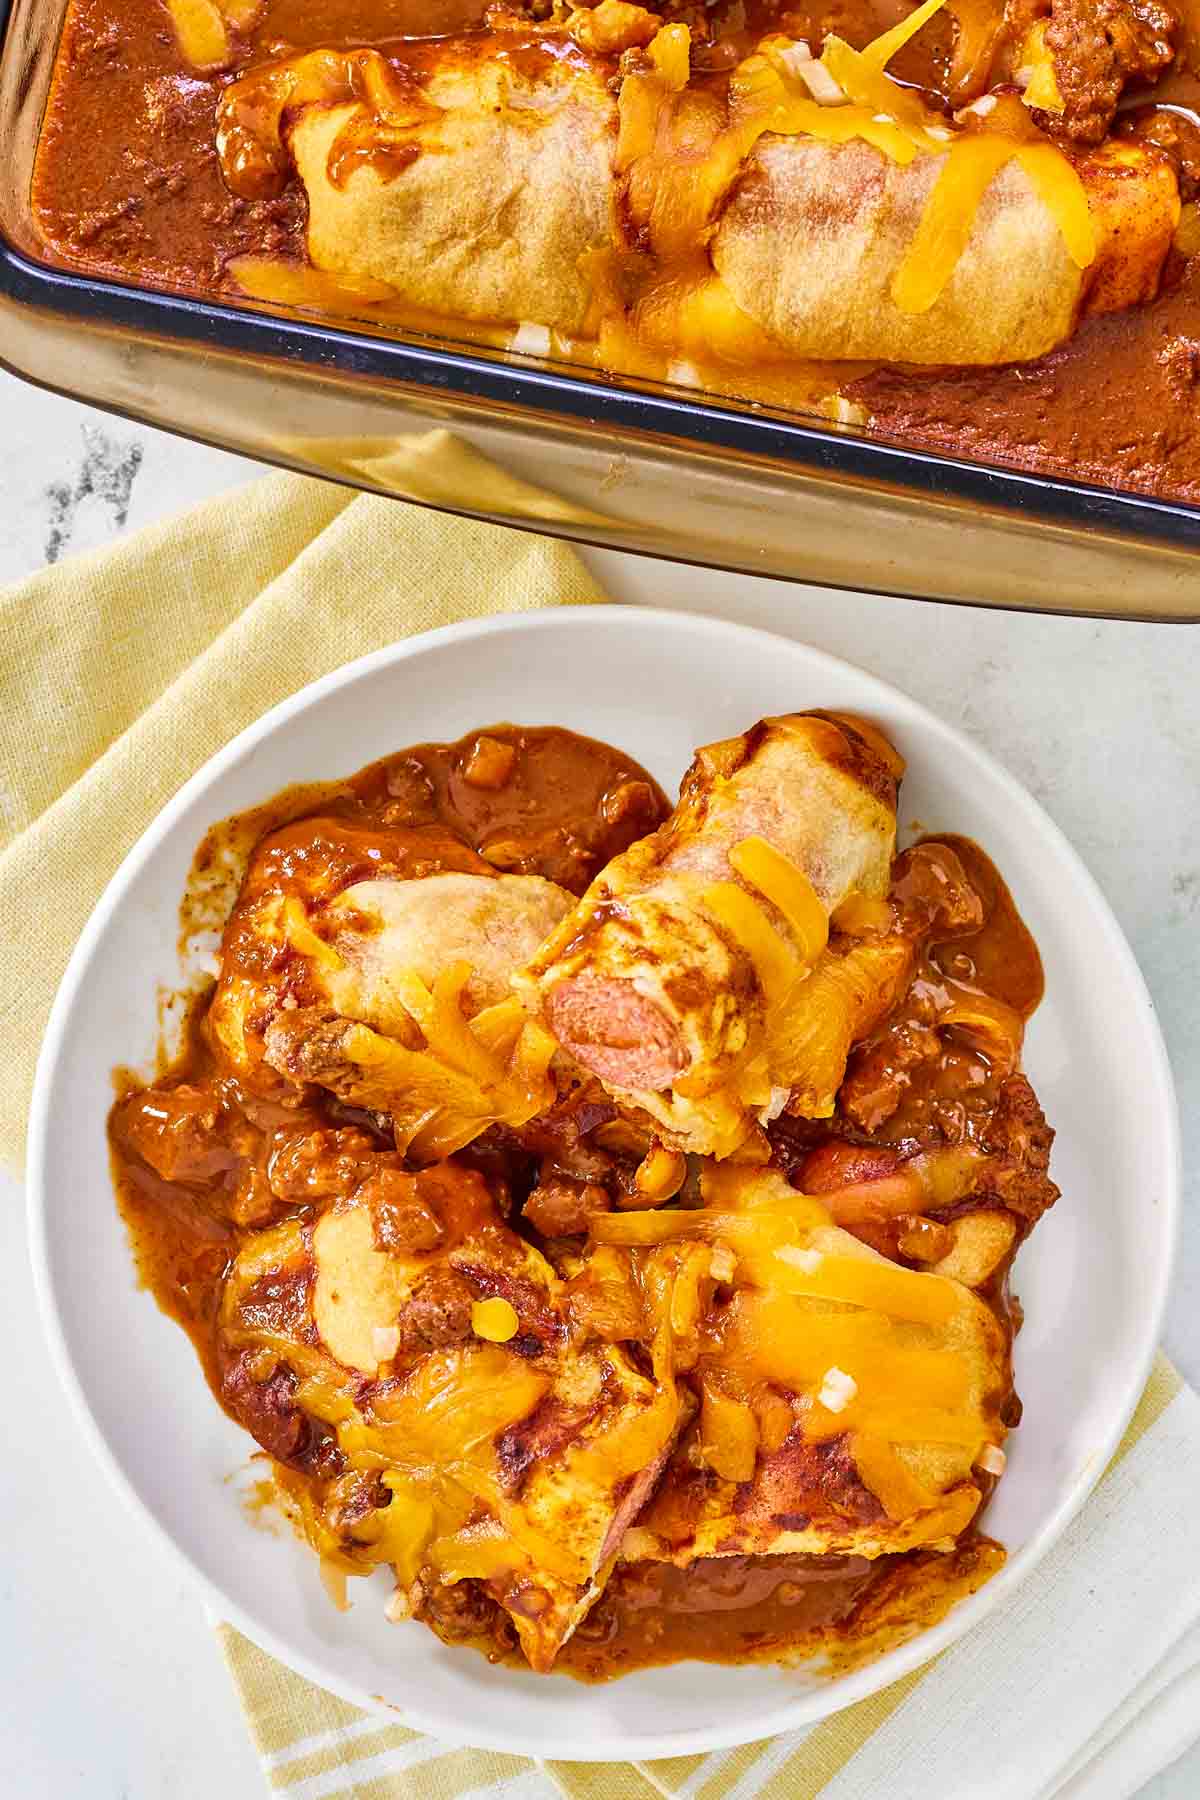 Chili dog casserole in a glass baking dish and a serving on a plate.